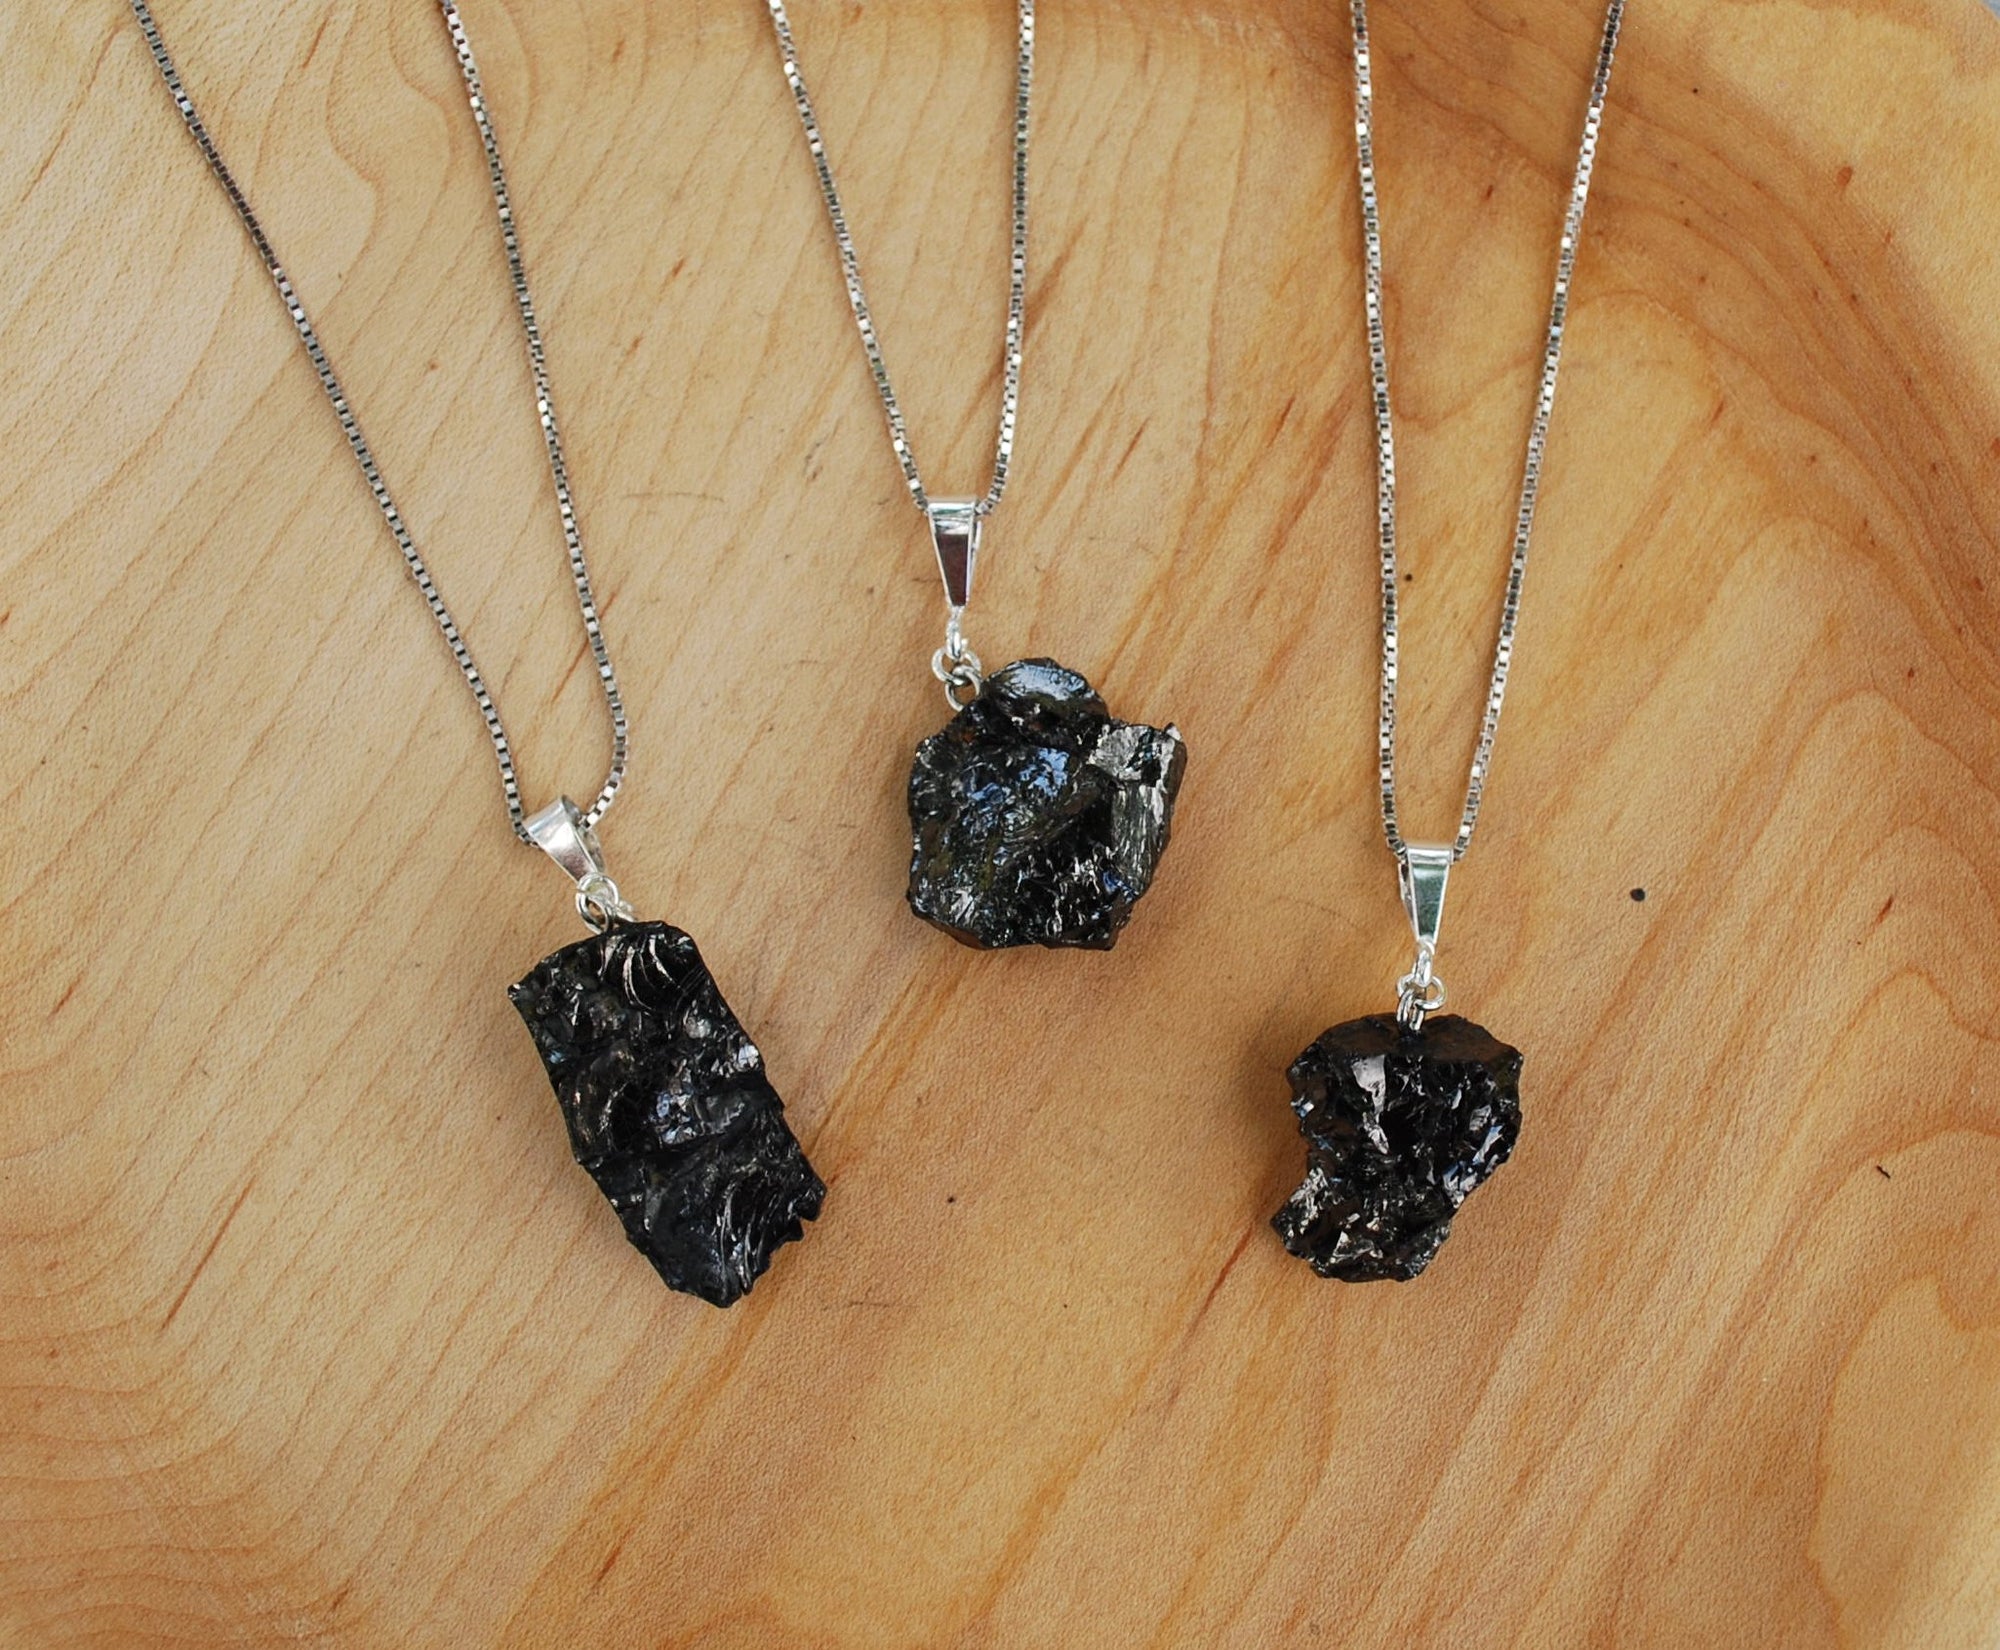 Elite Noble Raw Shungite Pendant and Sterling Silver Necklace (3 - 5 grams)